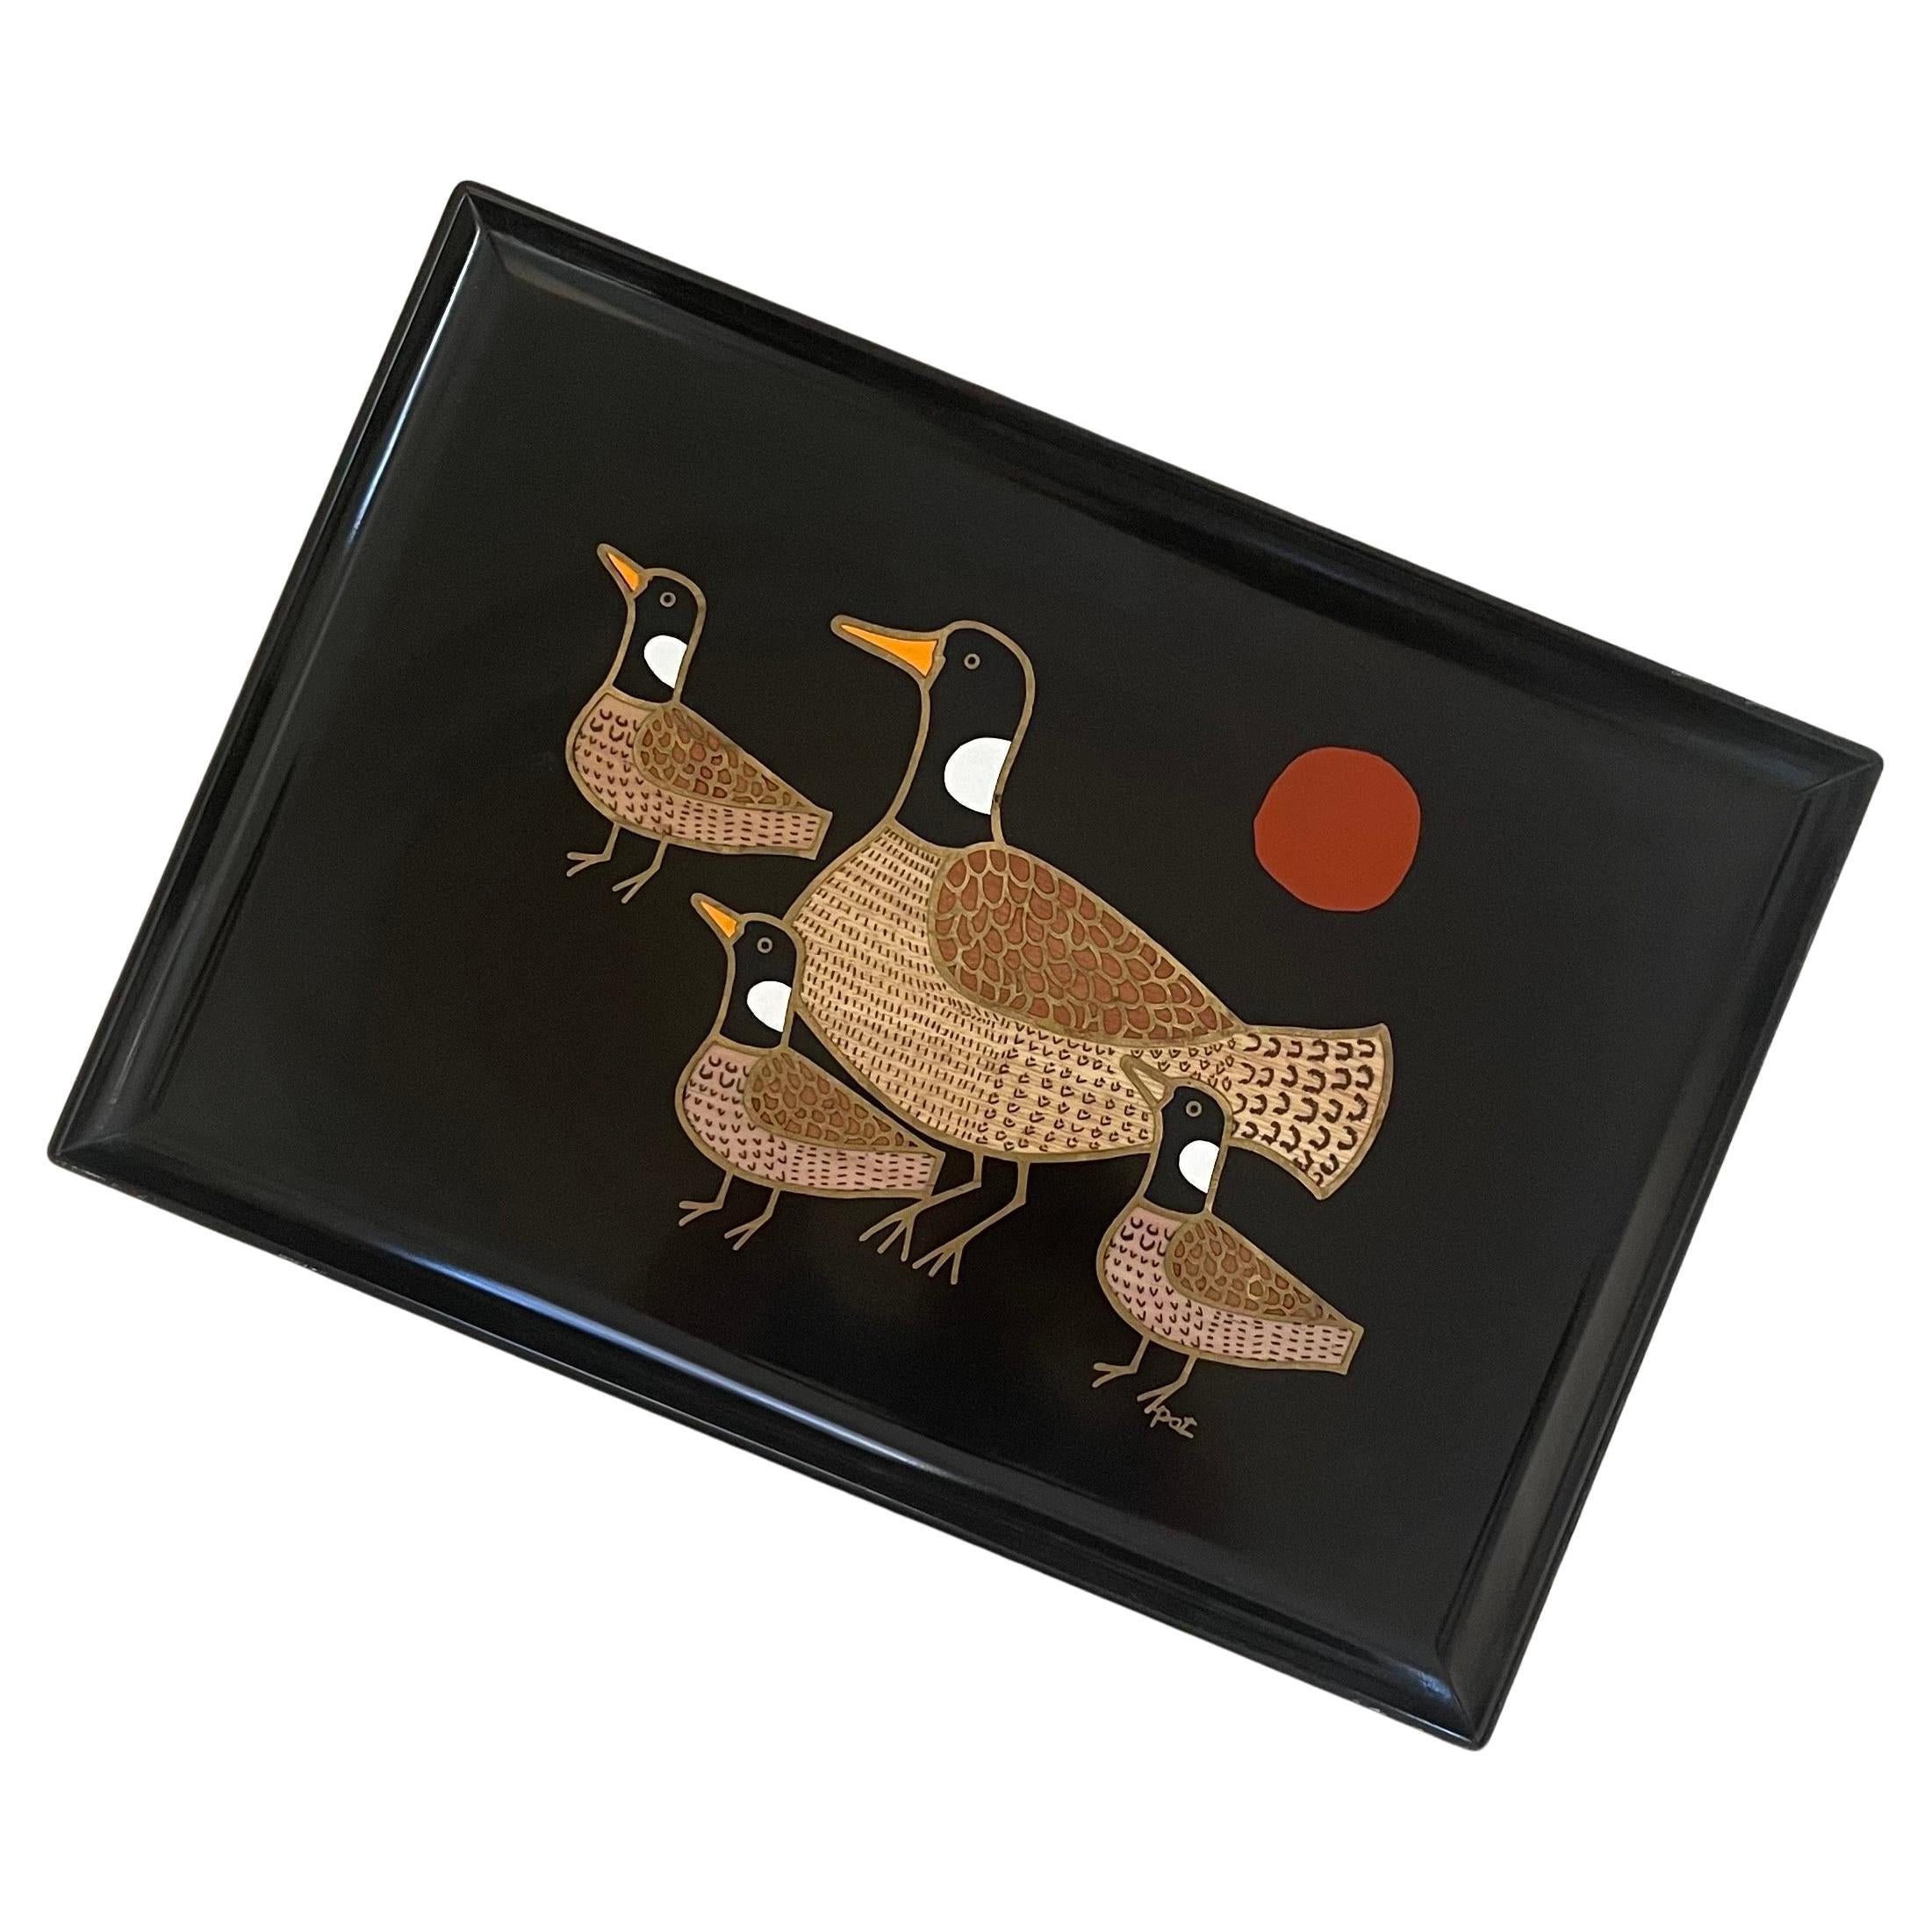 "Ducks" Tray by Couroc of California